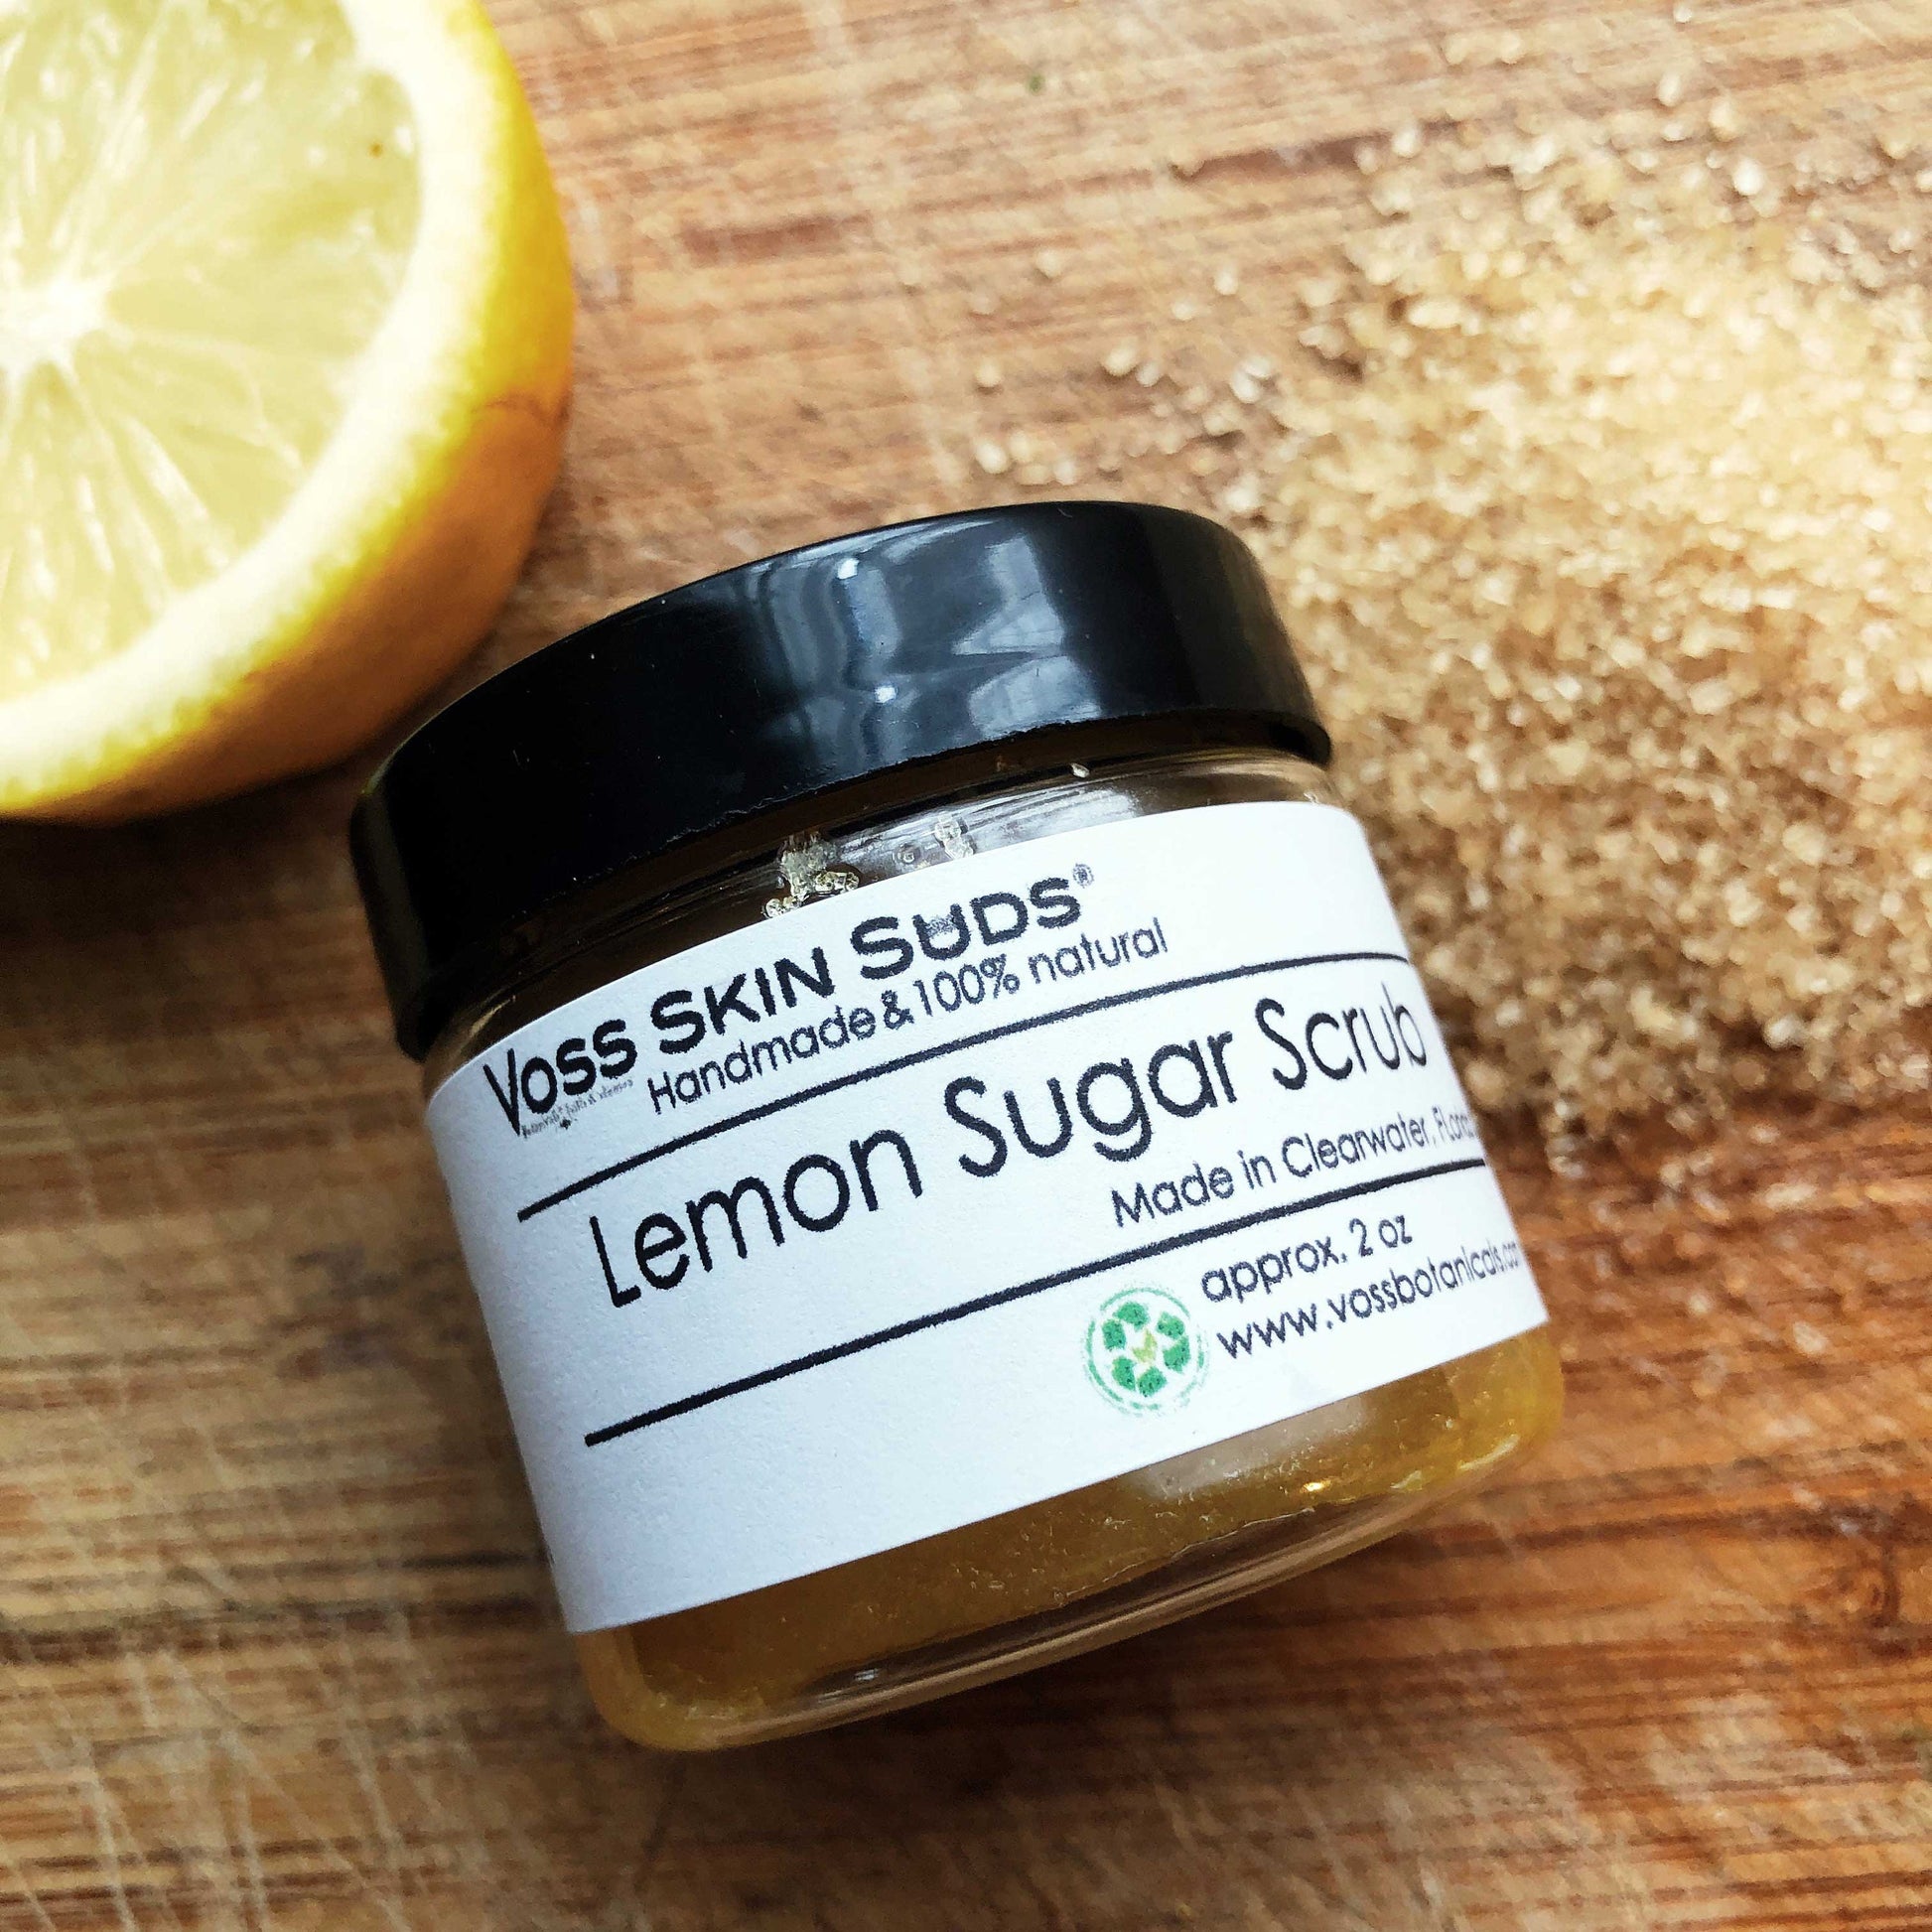 Lemon sugar scrub PRODUCT FOOTPRINTS Natural ingredients Phthalate, Sulfate, Petroleum & Paraben Free Vegan Free of Synthetic Fragrances Free of Synthetic Dyes GMO & Gluten-free Non Toxic Handmade Sustainable Innovation Made in the USA Cruelty Free Zero Waste Low Carbon Footprint eco friendly   Holiday care package gift box gift for her relaxation gift self care box self care gift box spa gift box spa gift set thank you gift box birthday gift new mom gift relaxing bath set spa gift set spa kit